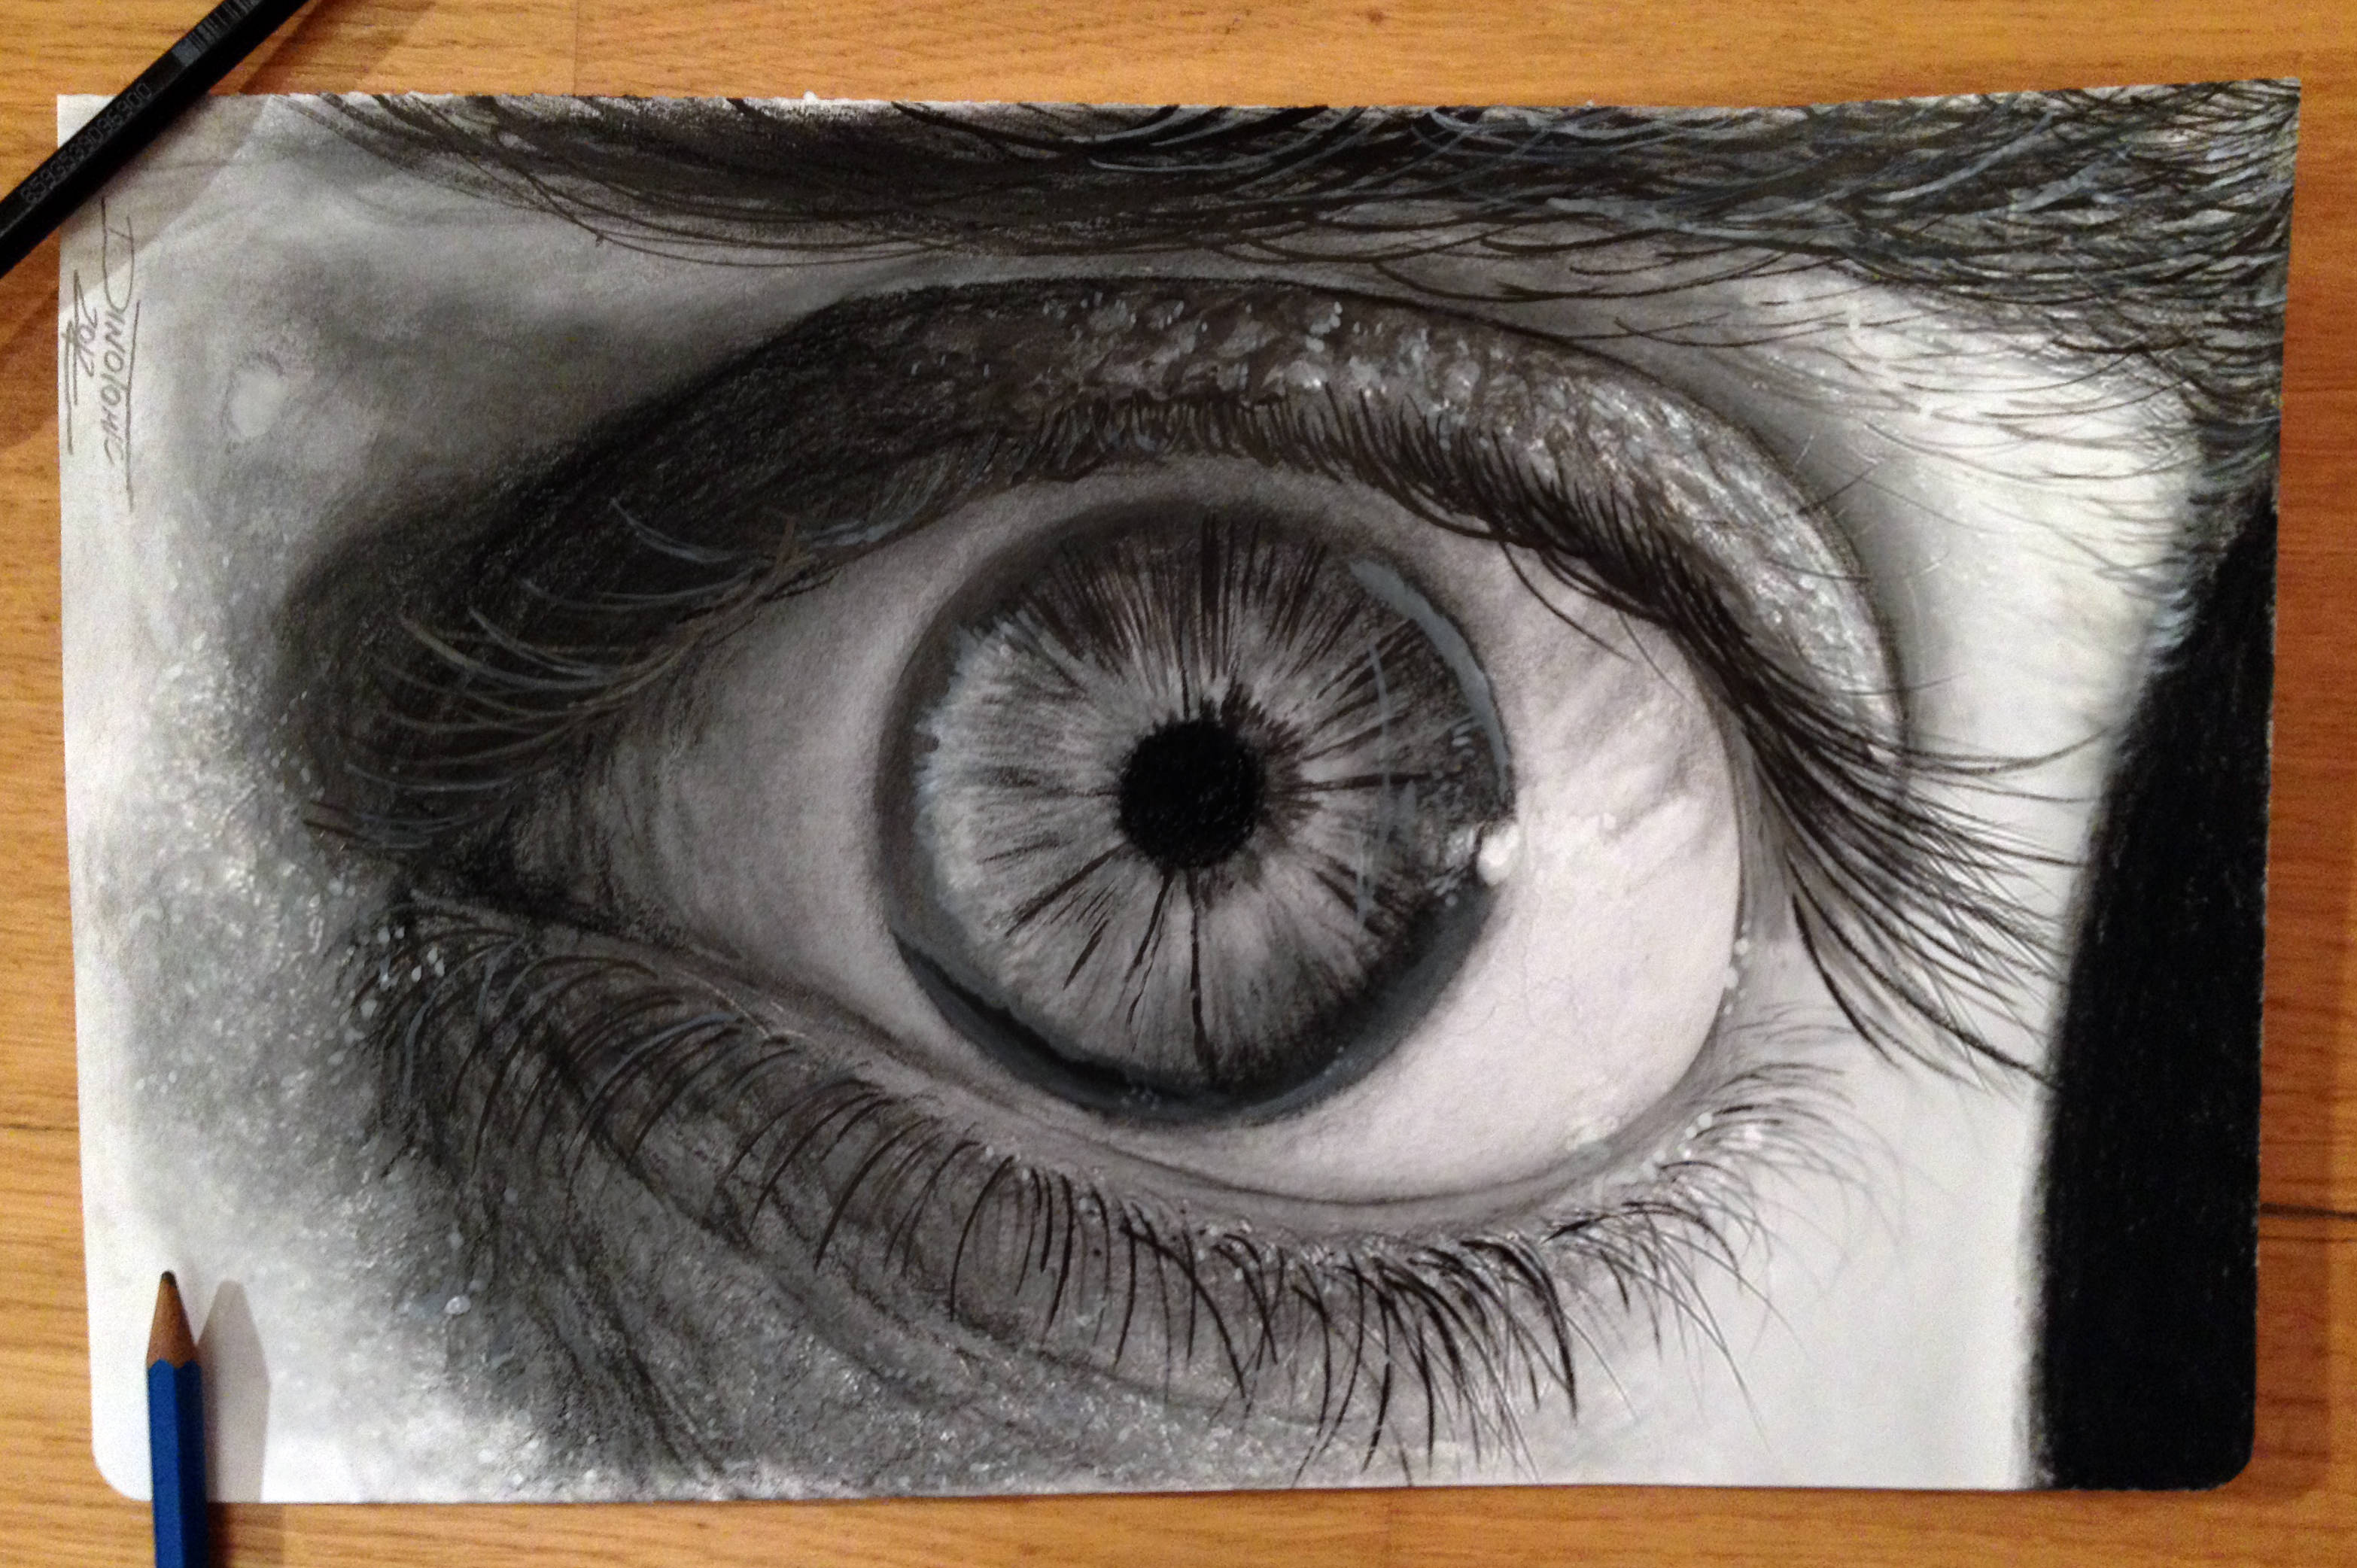 18+ Collection Of Pencil Drawing Of Eye Drawings, Art Ideas Design